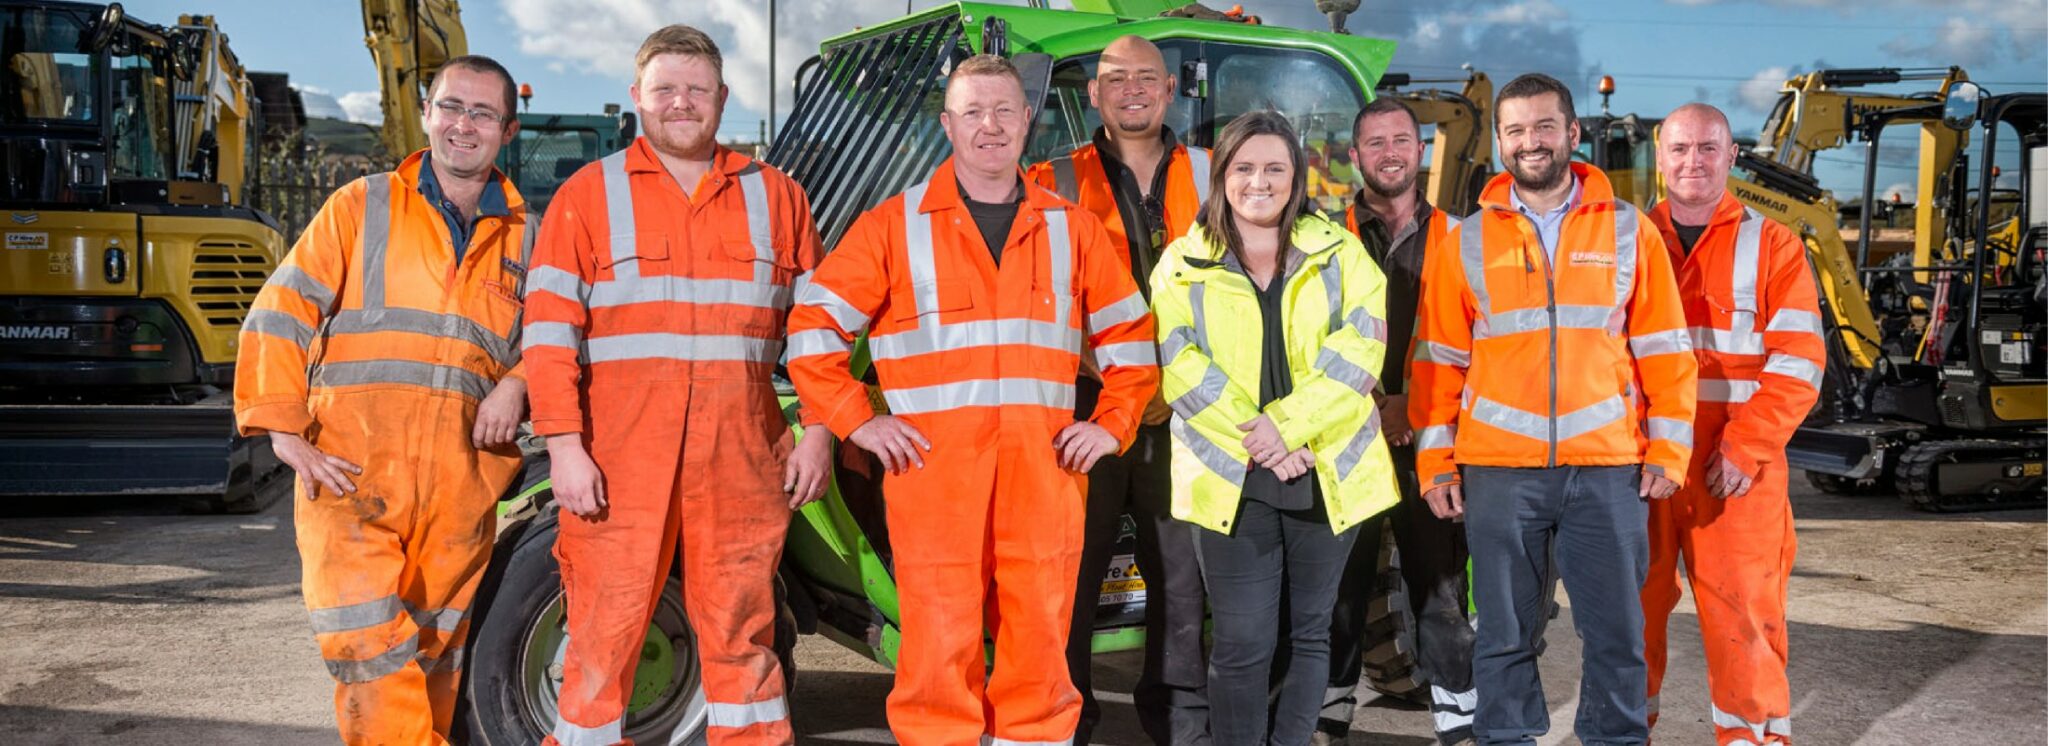 Group photo of the staff at CP Hire with the site depot in the background